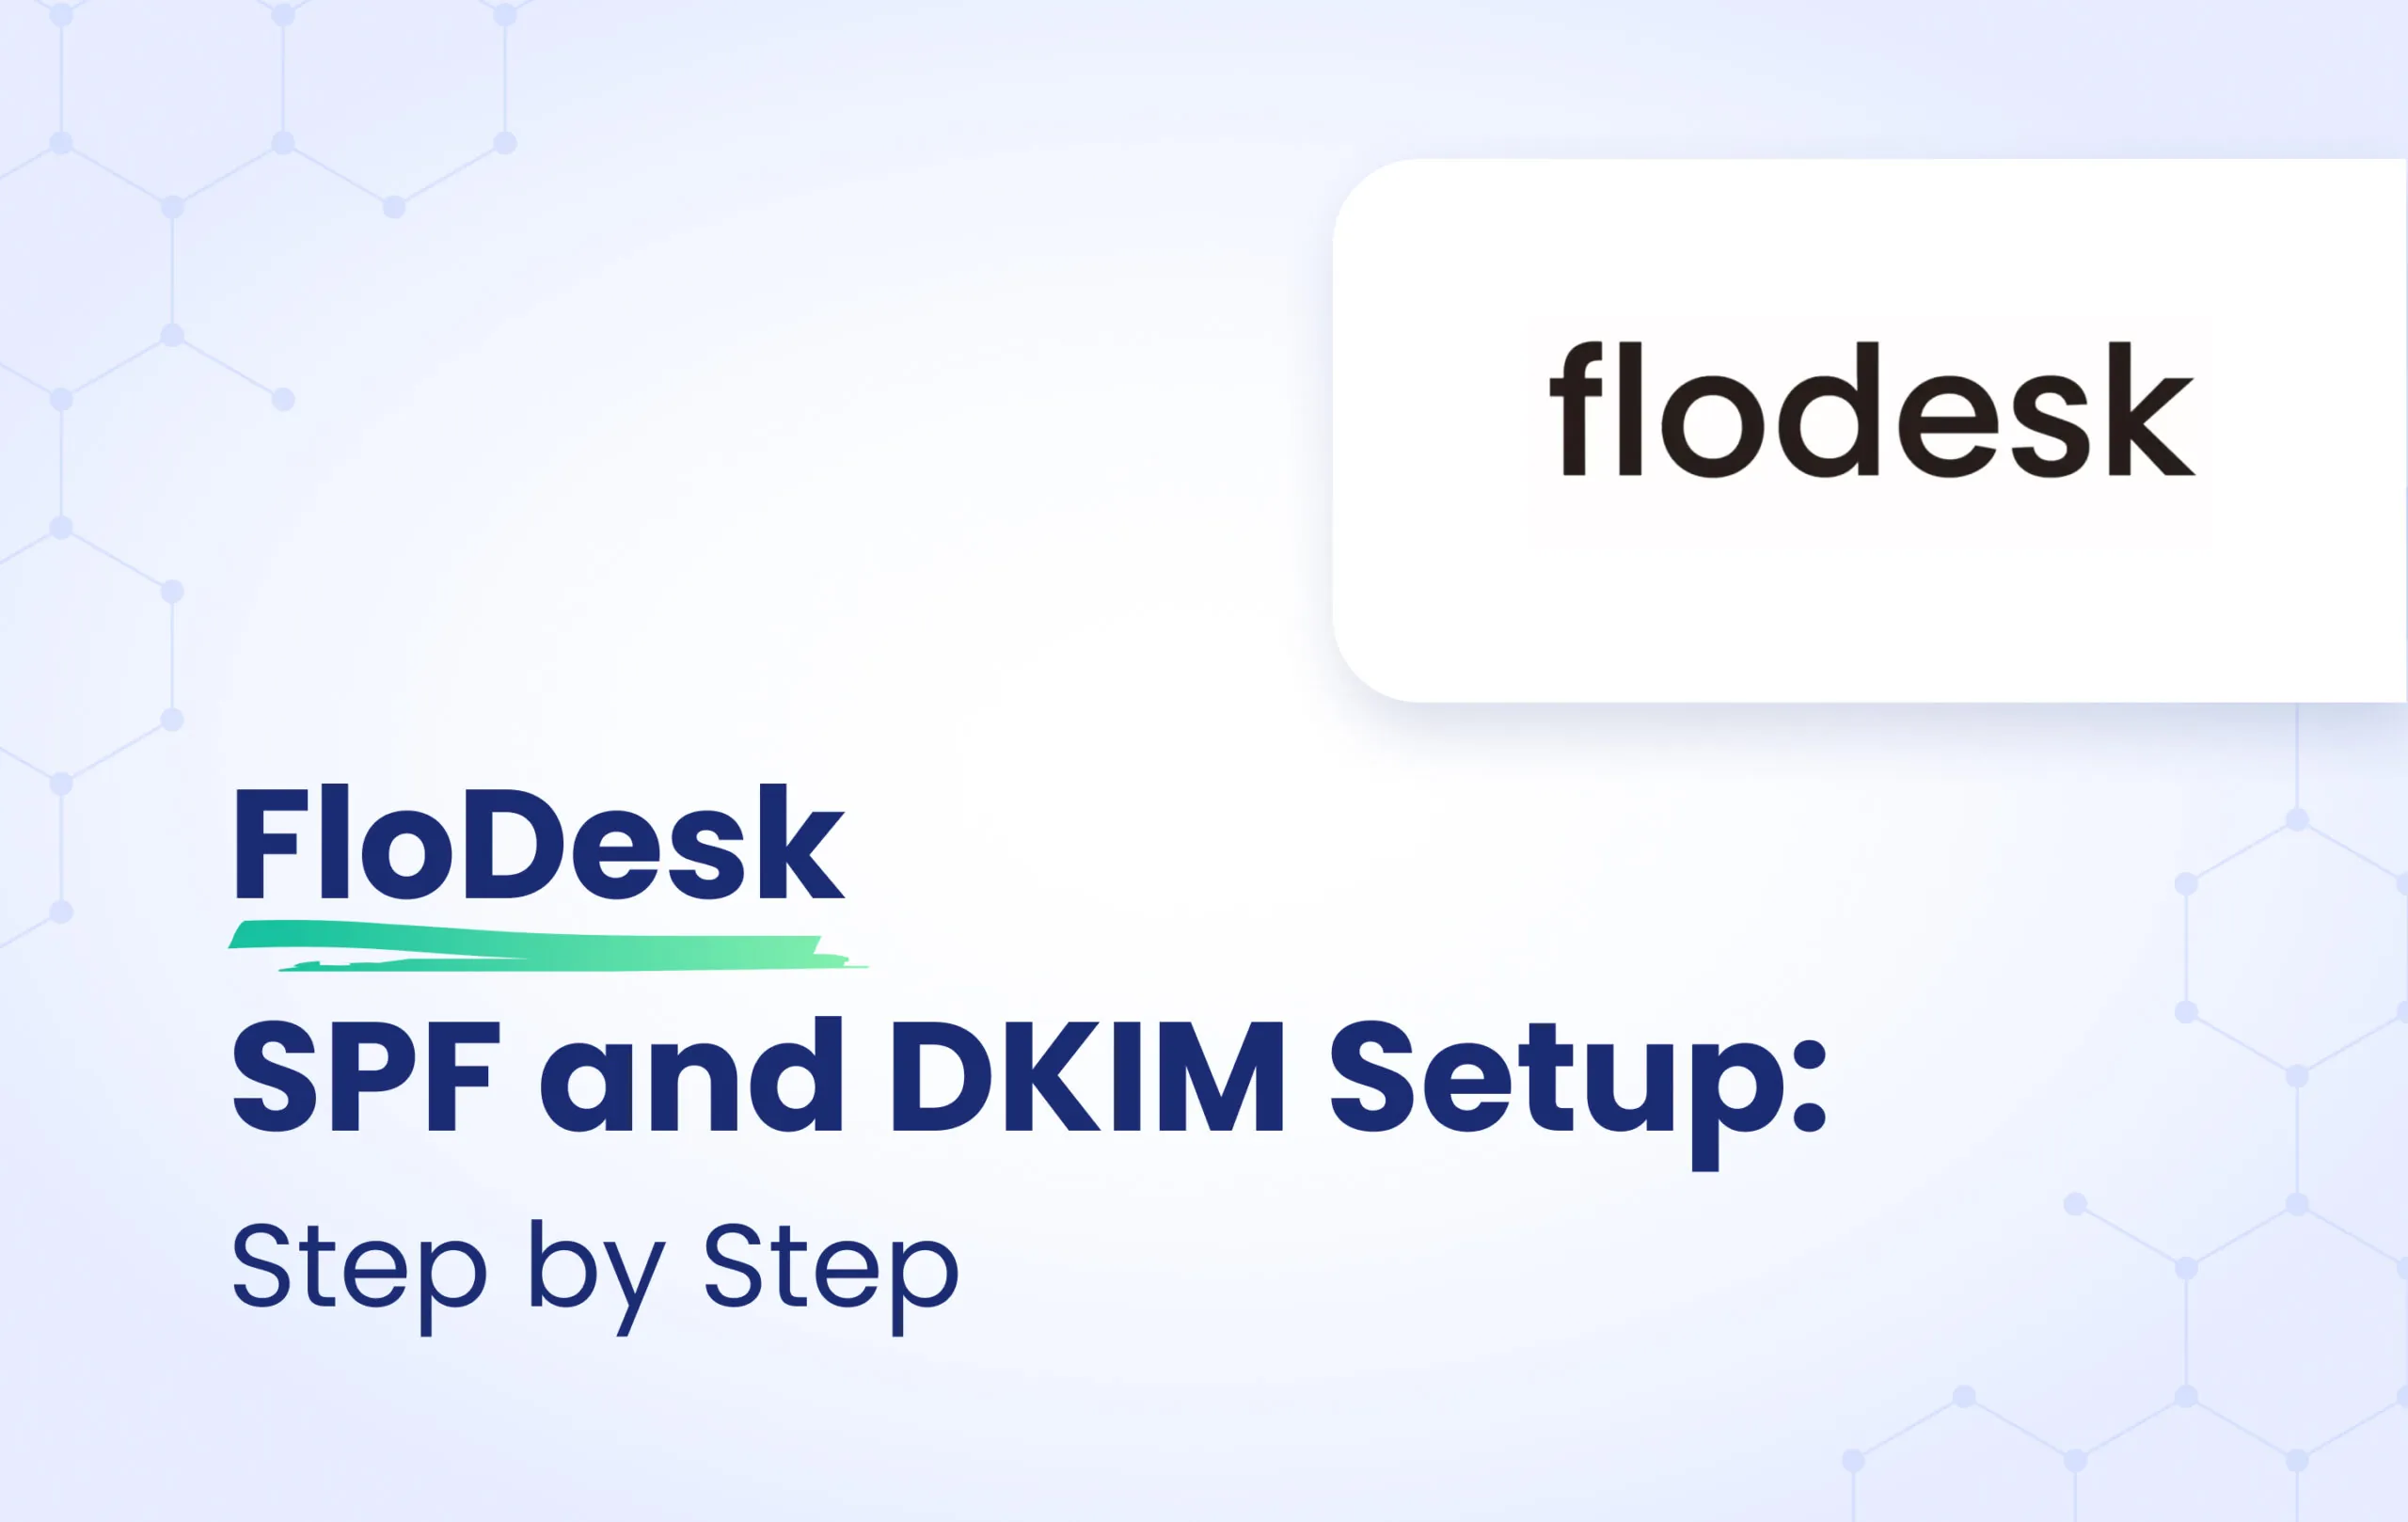 Flodesk SPF and DKIM configuration